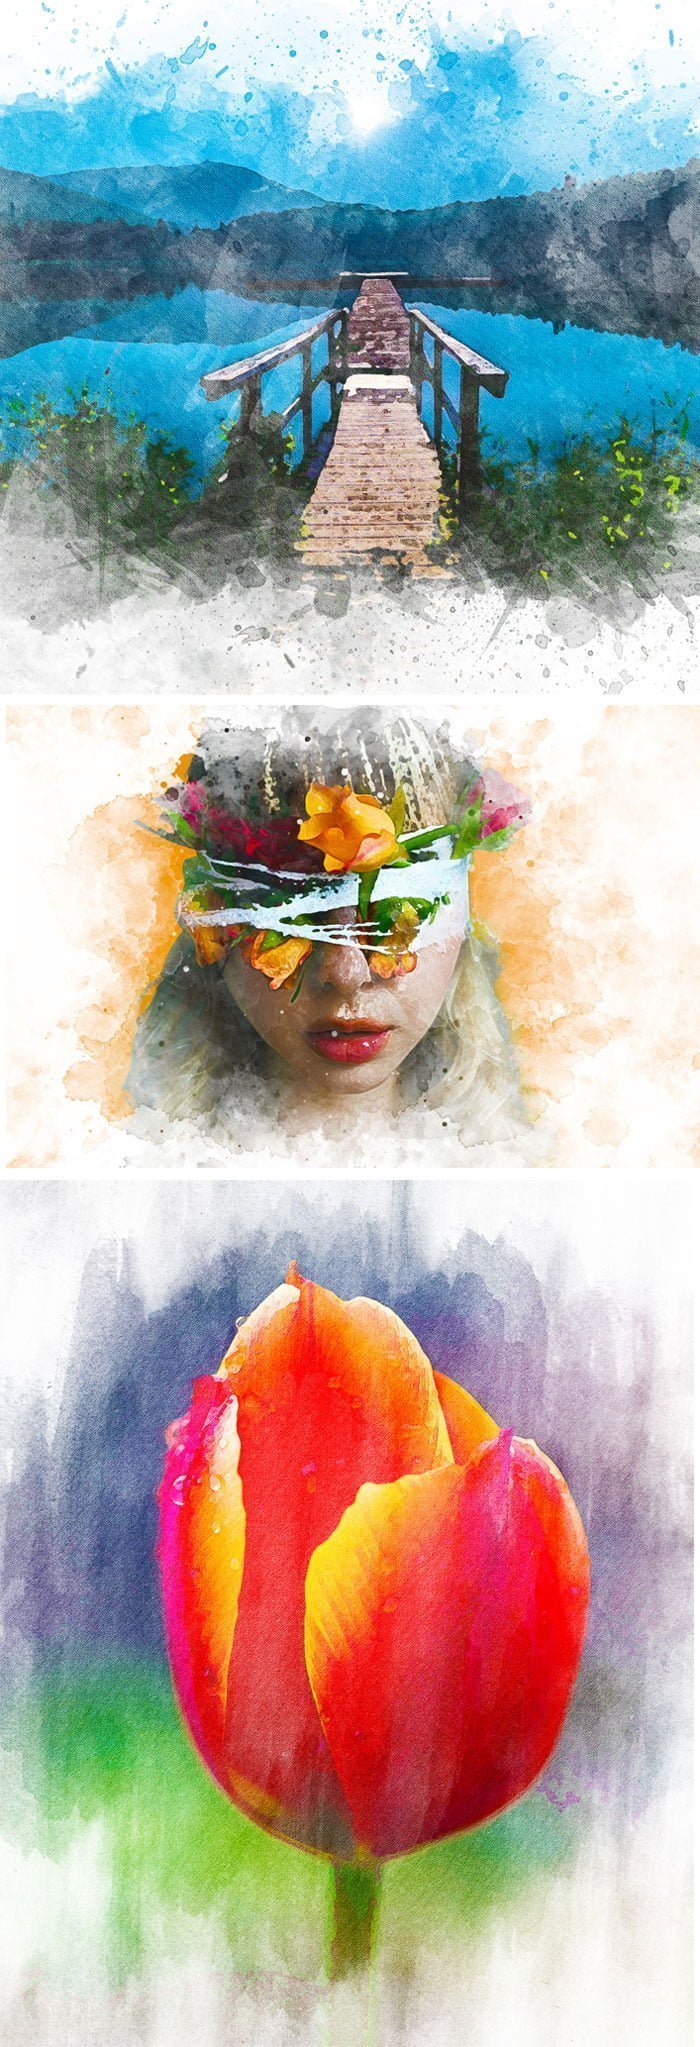 Watercolor PSD Photo Effect